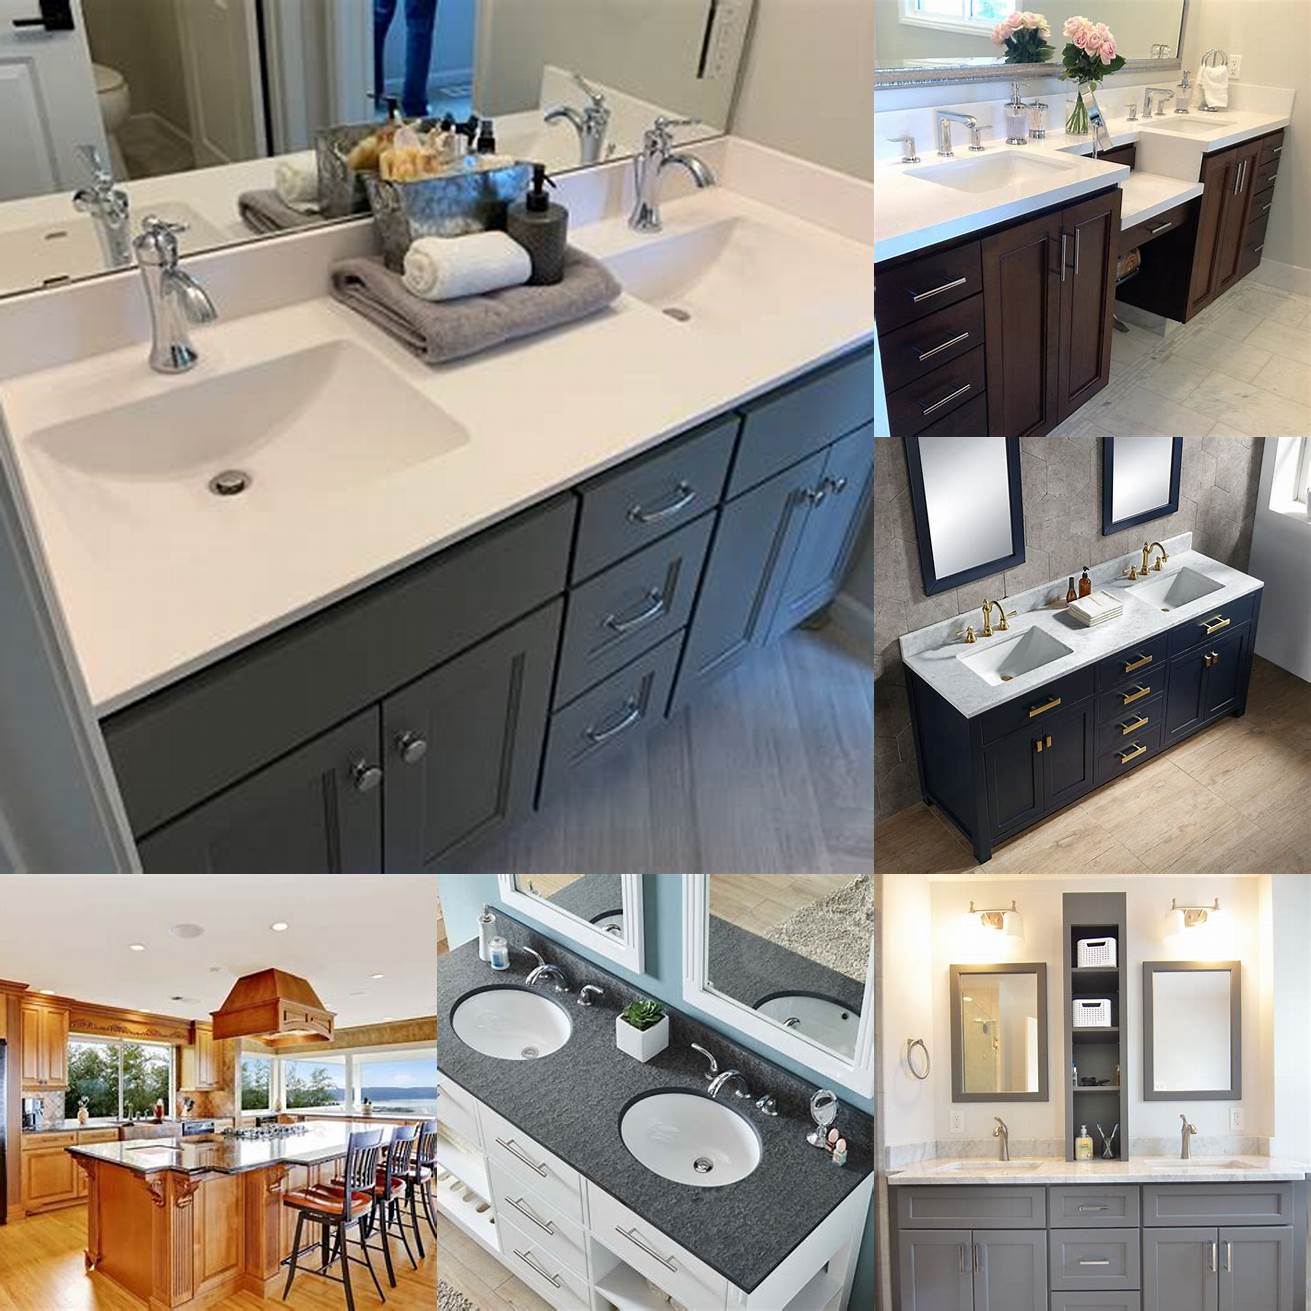 More space With two sinks and more countertop space you and your partner can get ready at the same time without bumping into each other